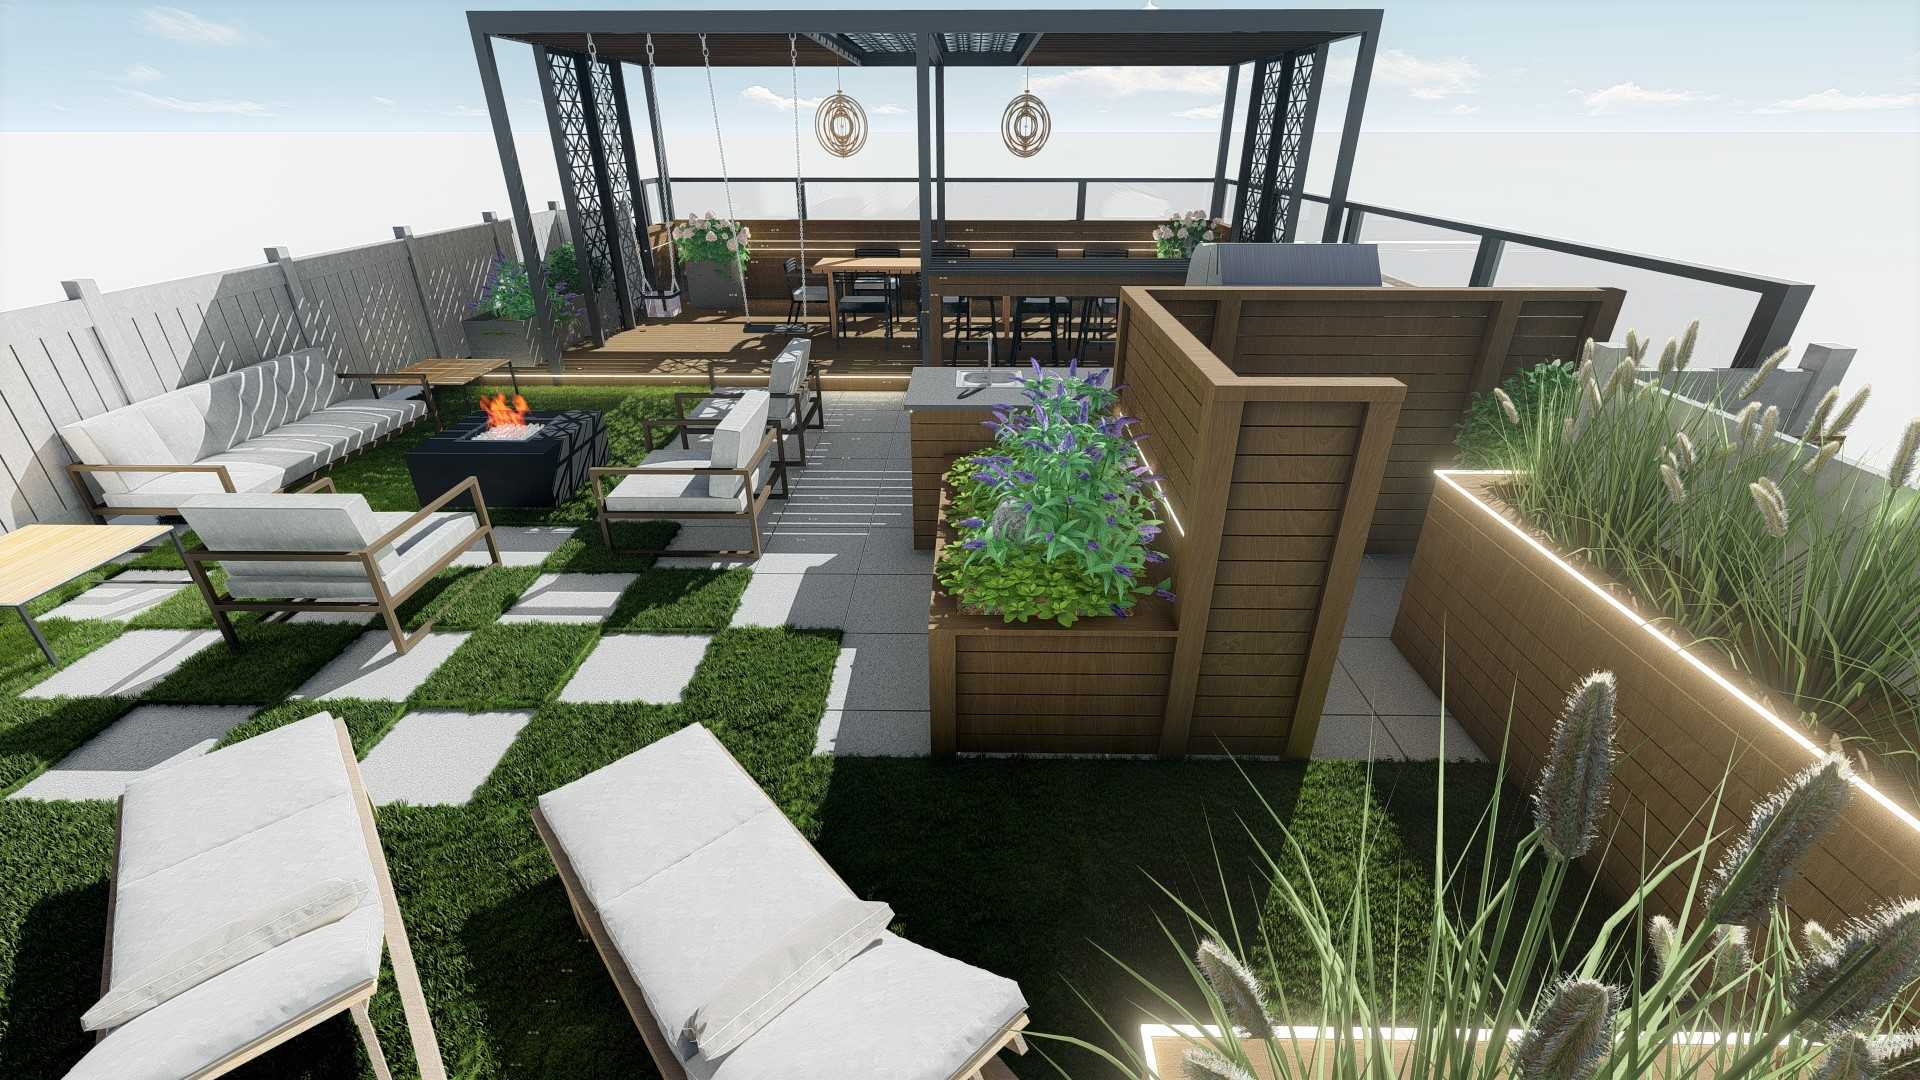 Custom planters, dining area in the background